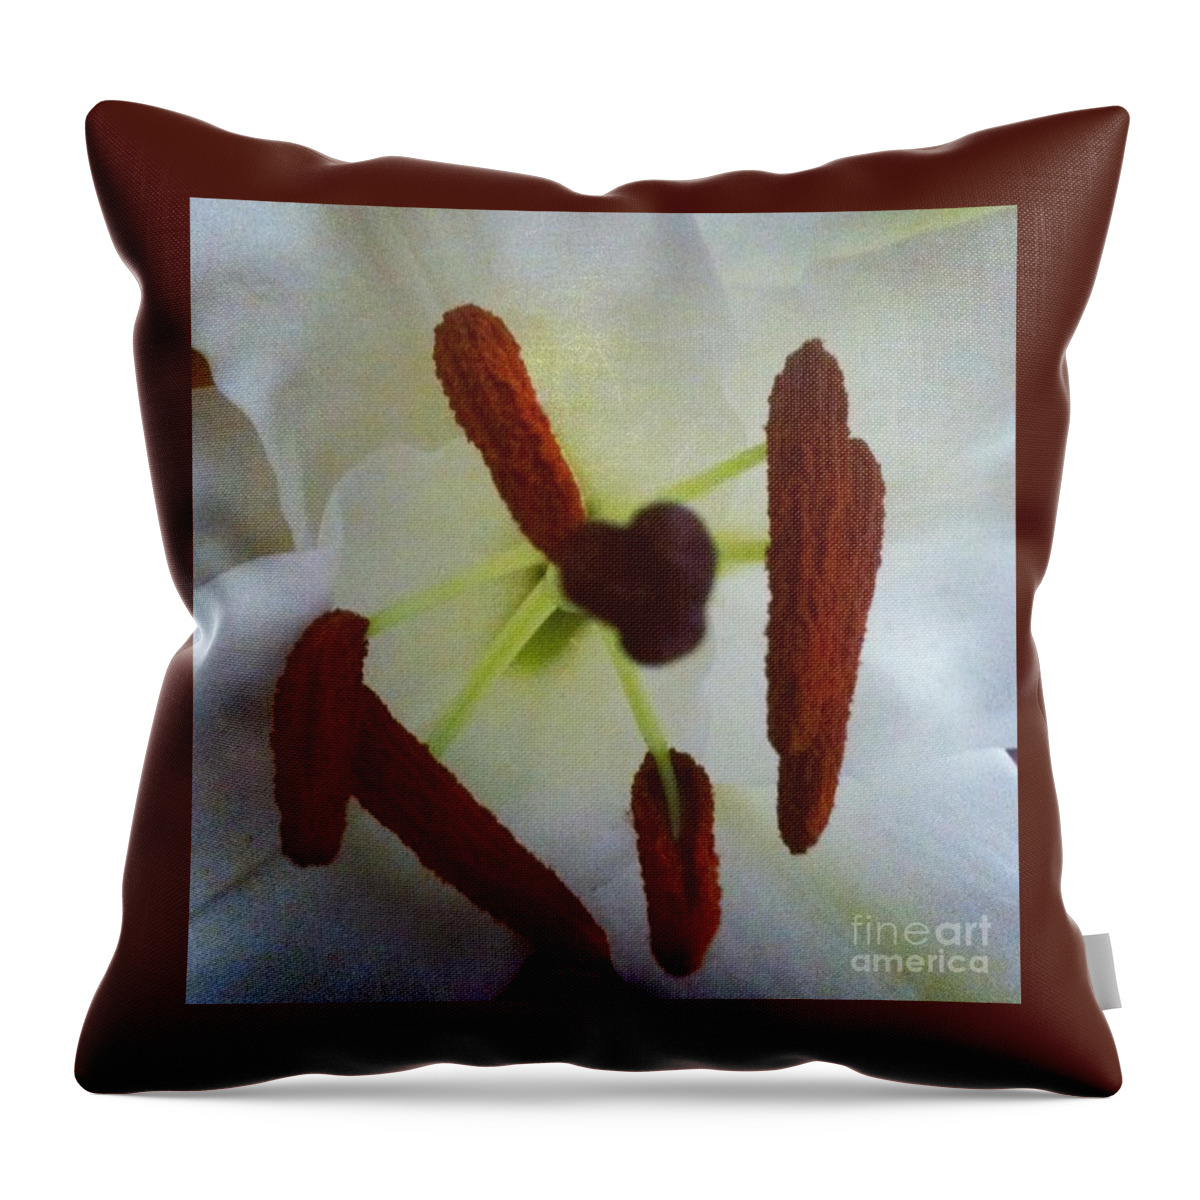 Flower Throw Pillow featuring the photograph Peek by Denise Railey